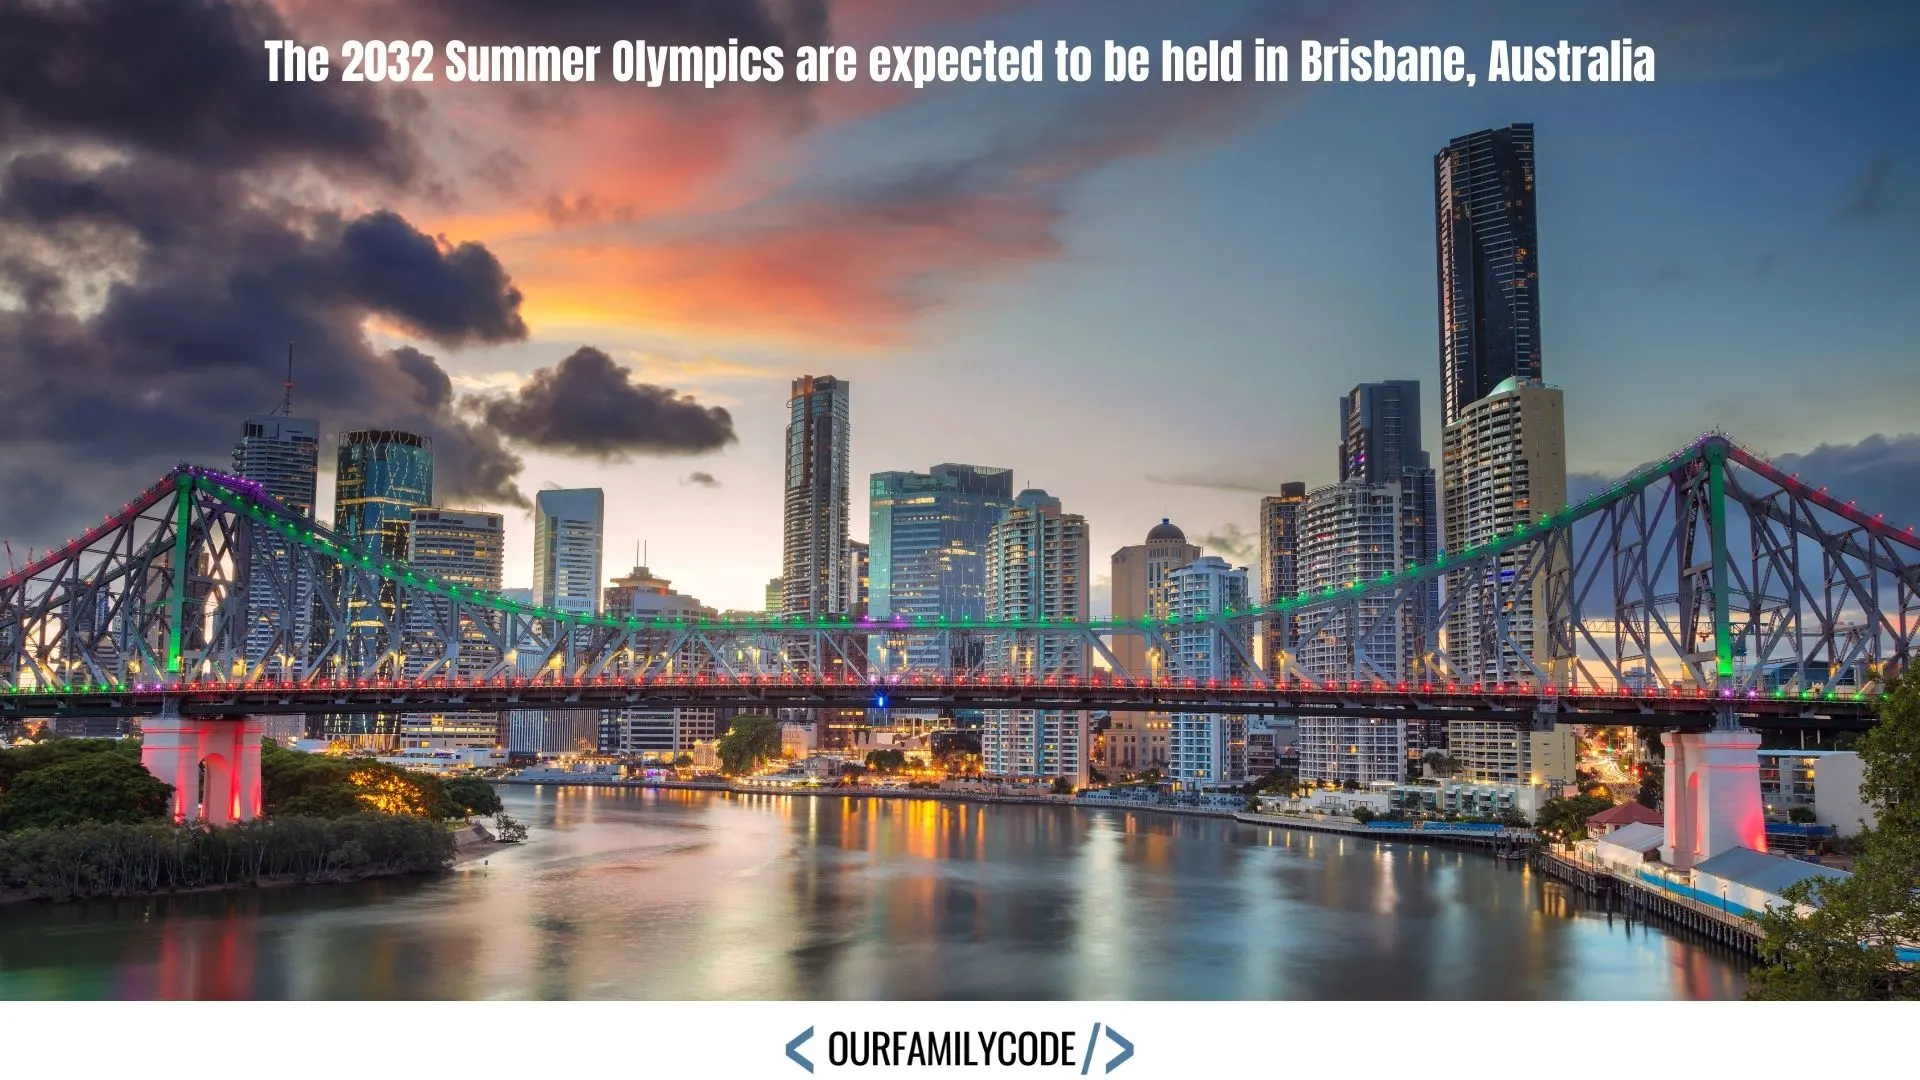 A picture of a cityscape in Brisbane, Australia with text that reads "The 2032 Summer Olympics are expected to be held in Brisbane, Australia".